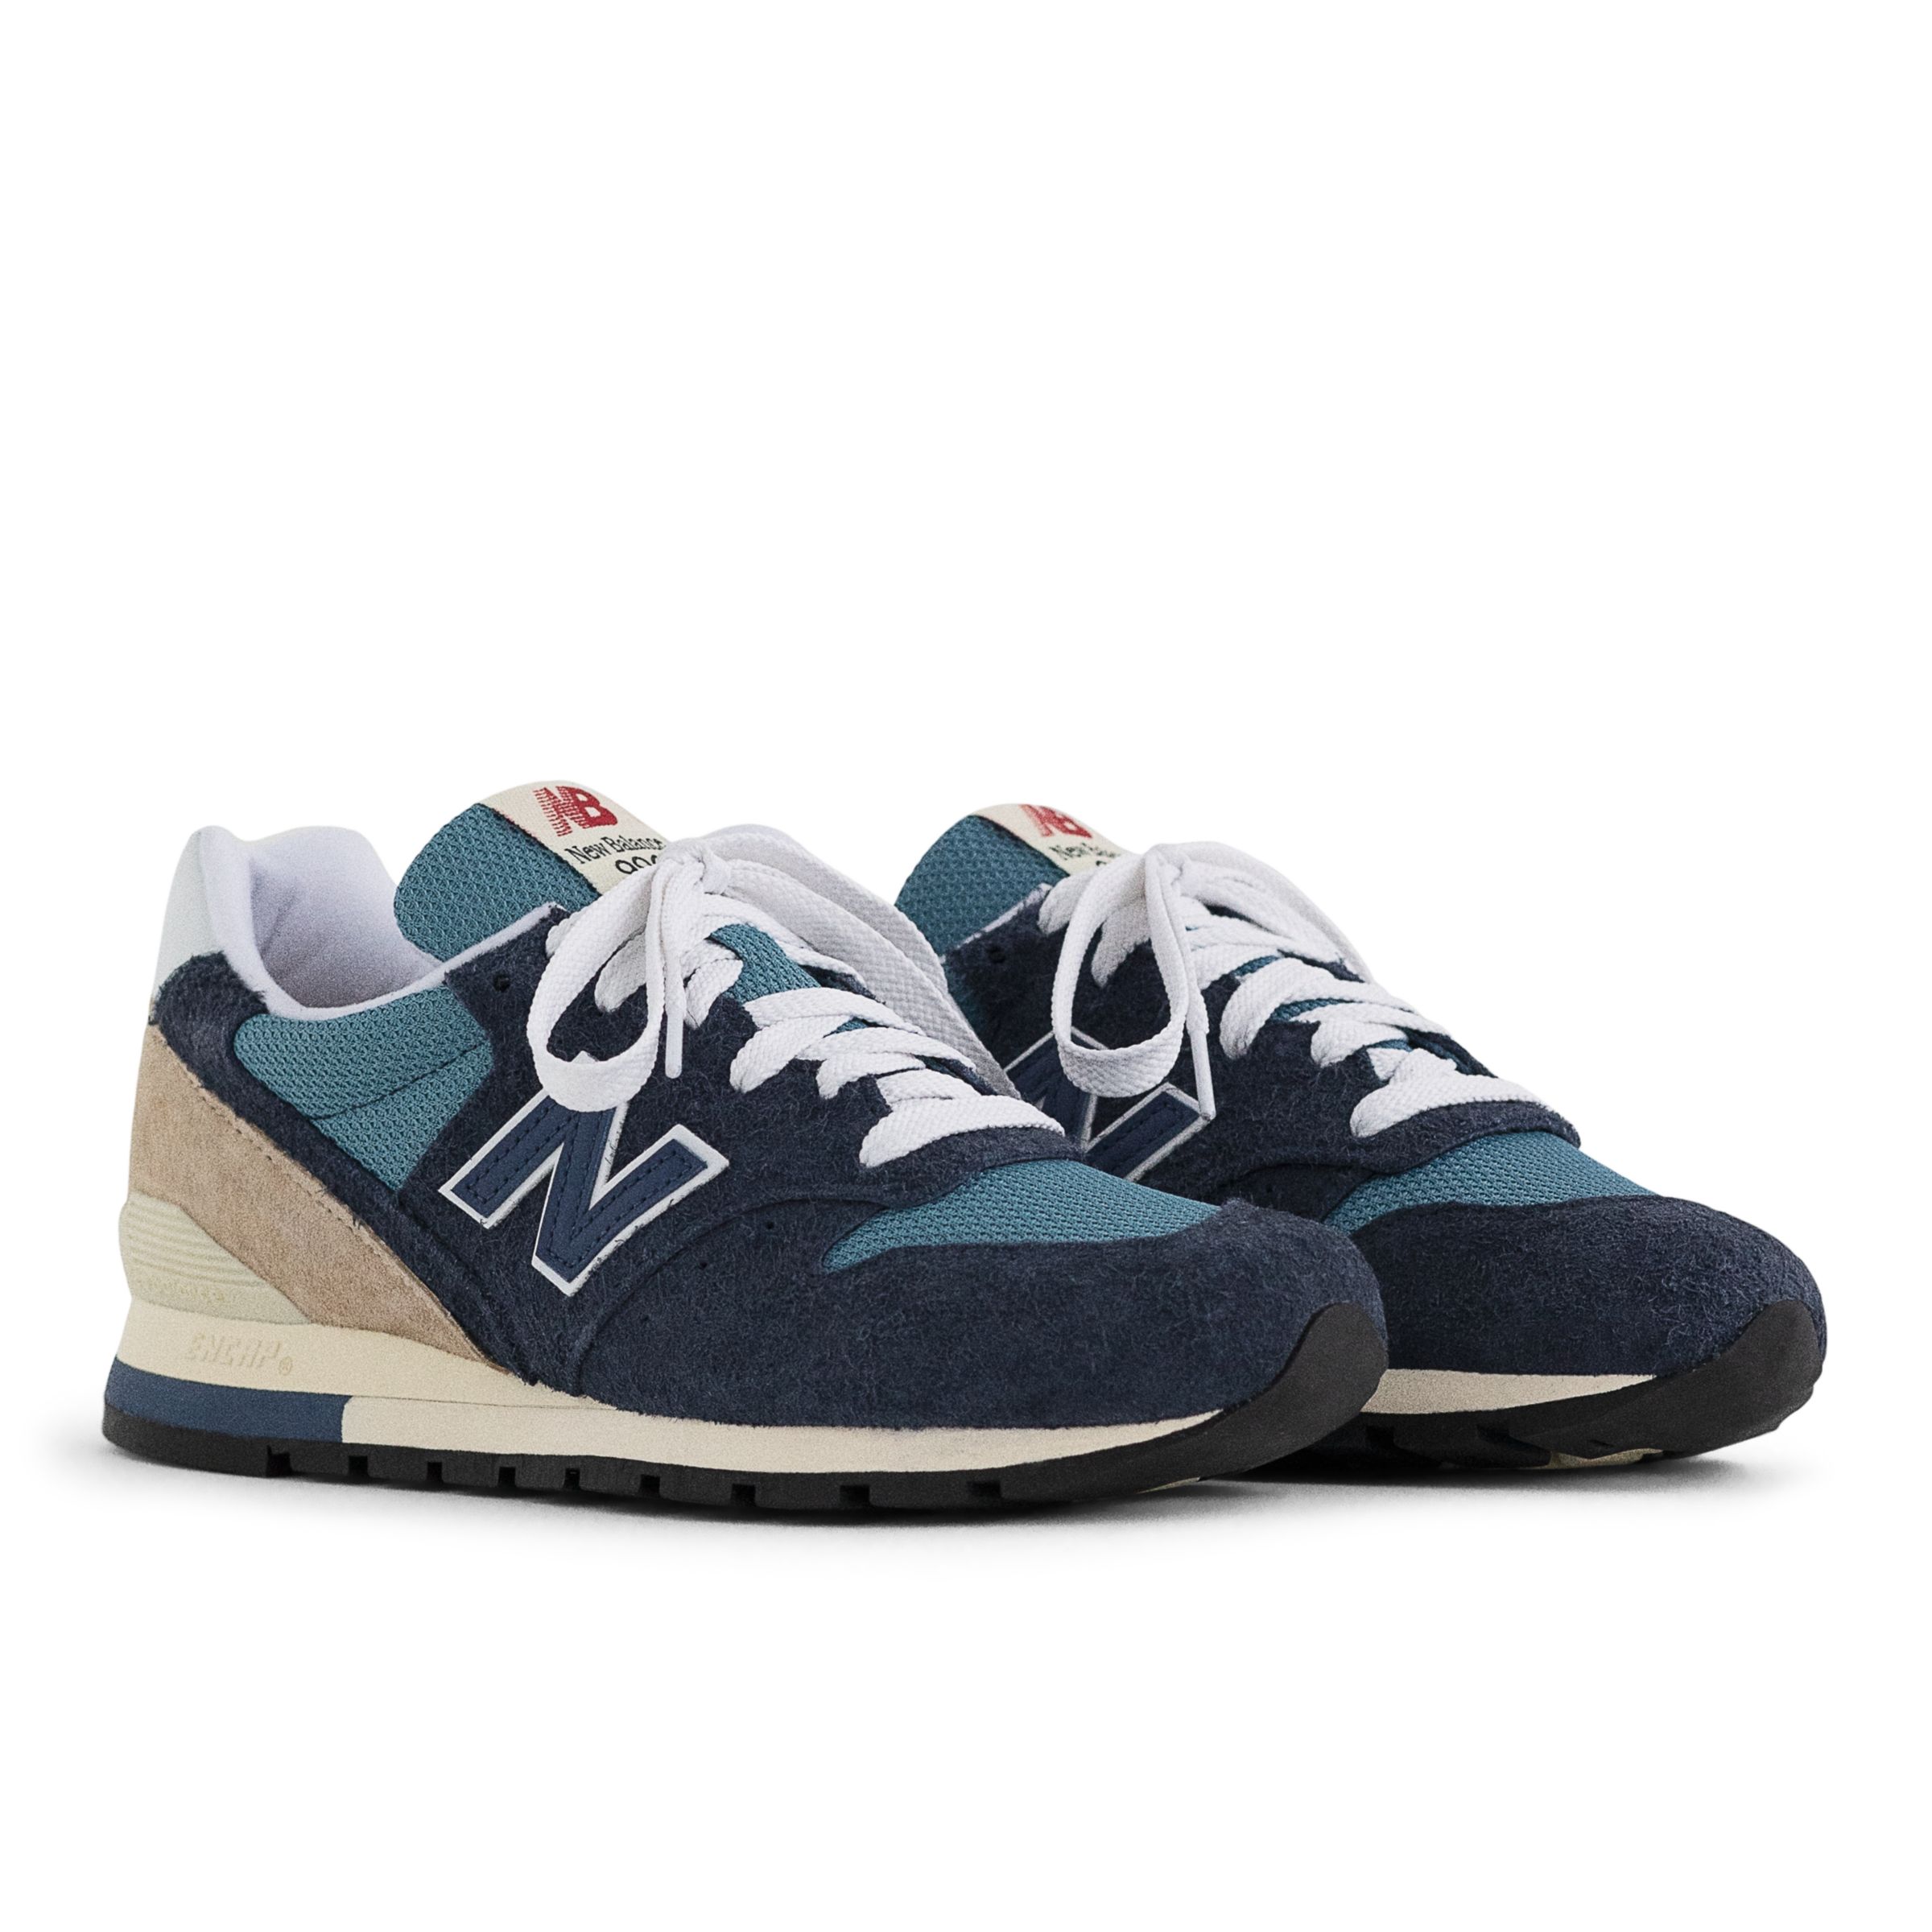 Made in USA 996 - Joe's New Balance Outlet